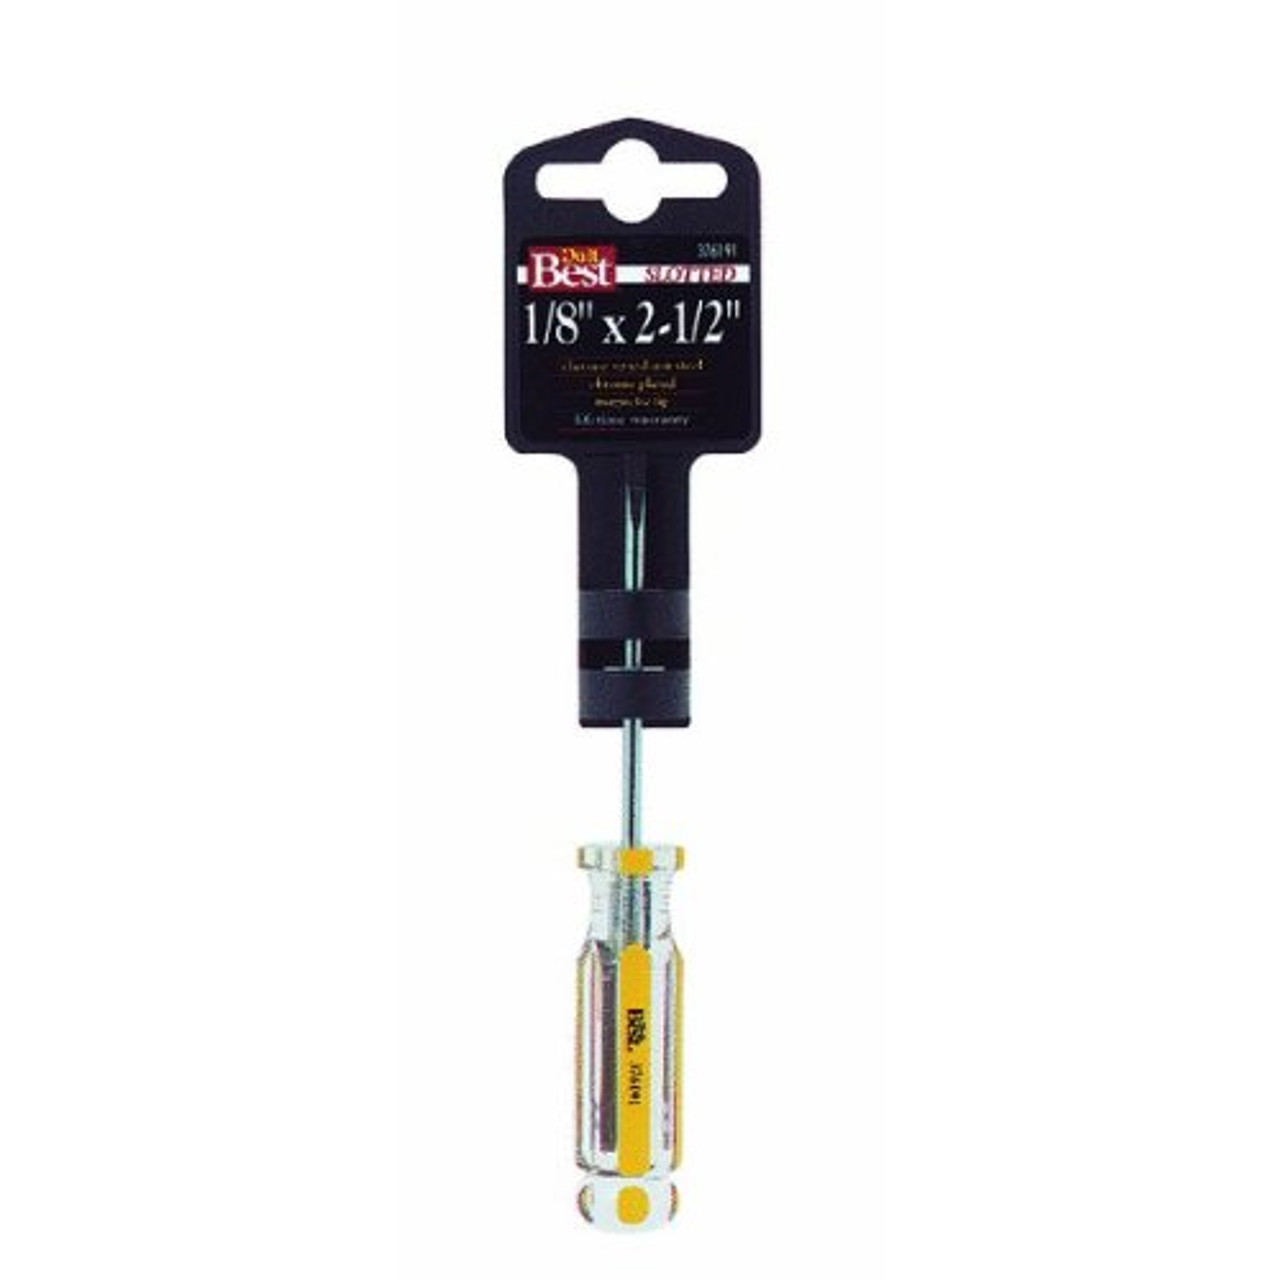 Do It Best 376566 Slotted Screwdriver, 3/8" x 8"